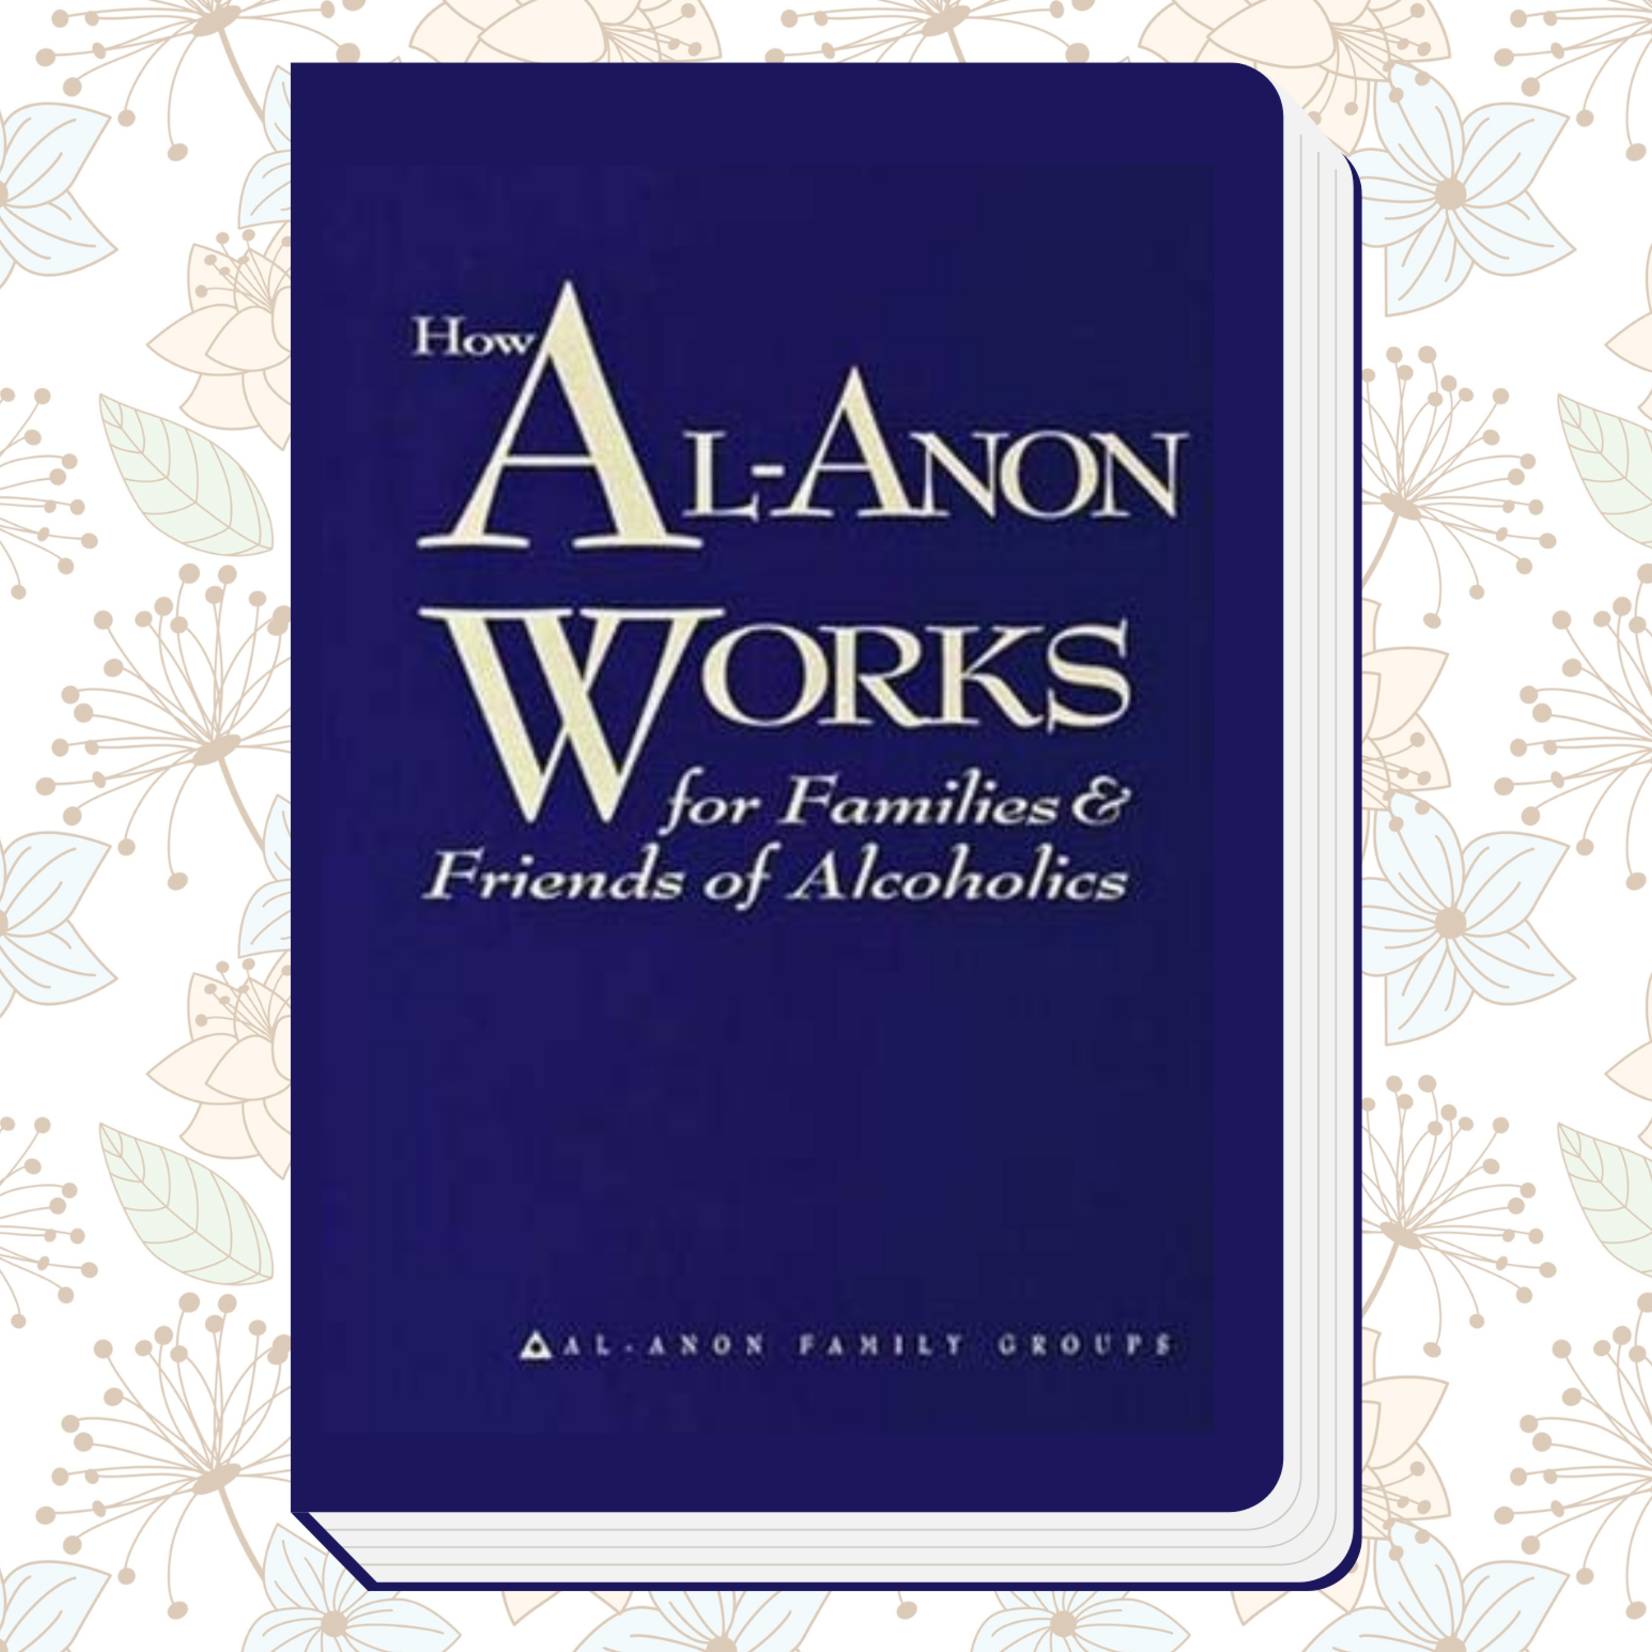 Al-Anon: Works for Families & Friends of Alcoholics